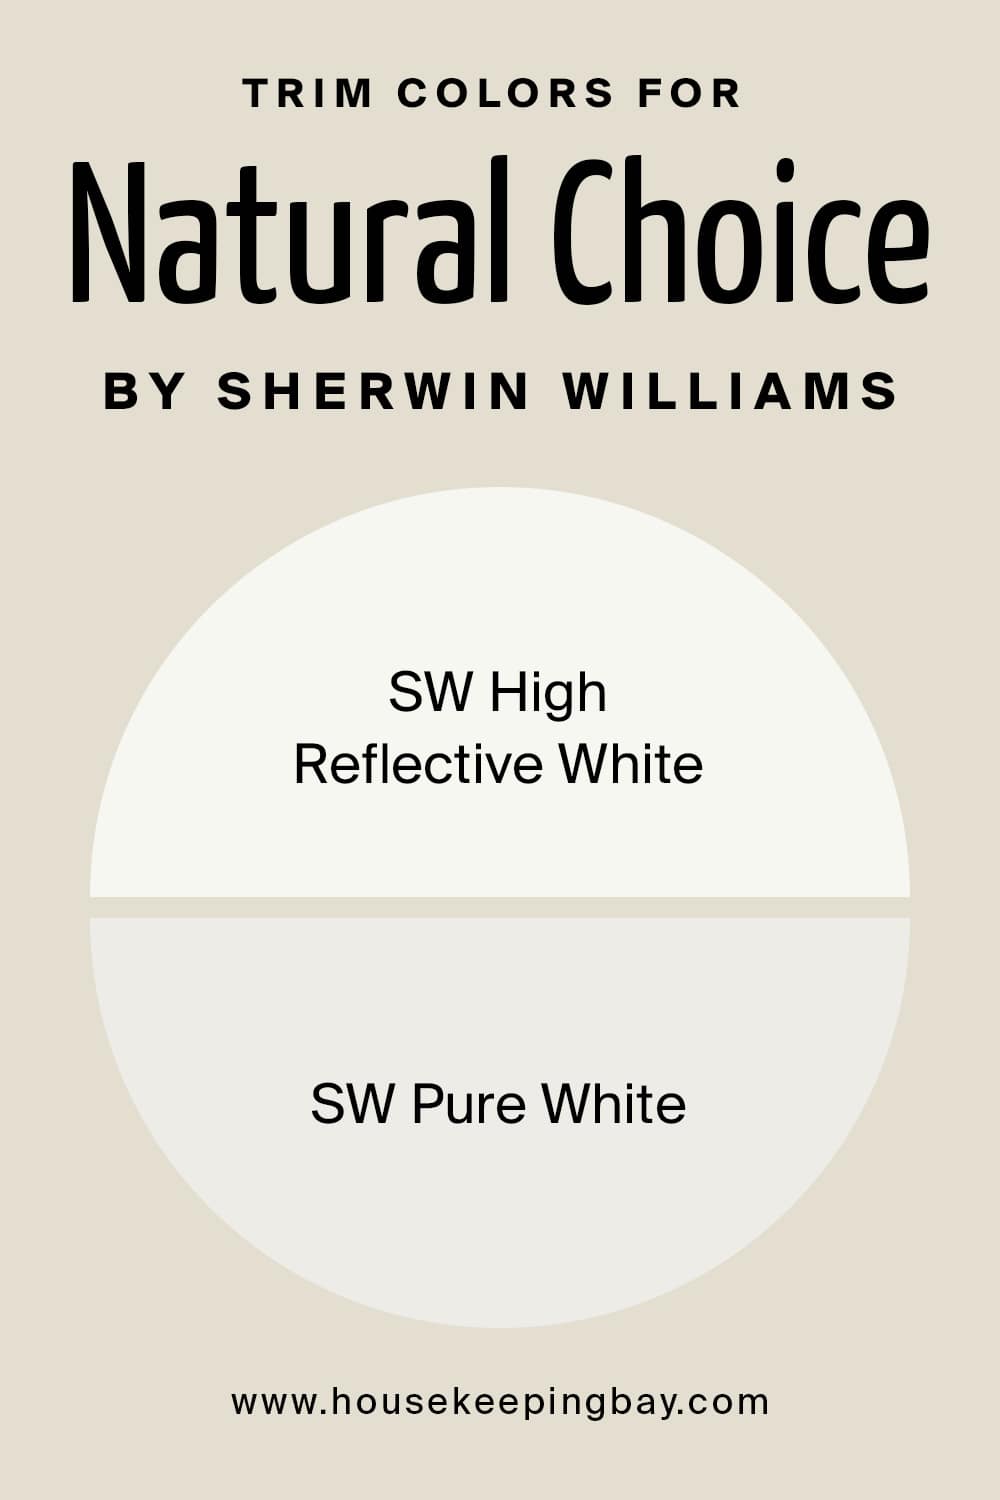 Trim Colors for Natural Choice by Sherwin Williams